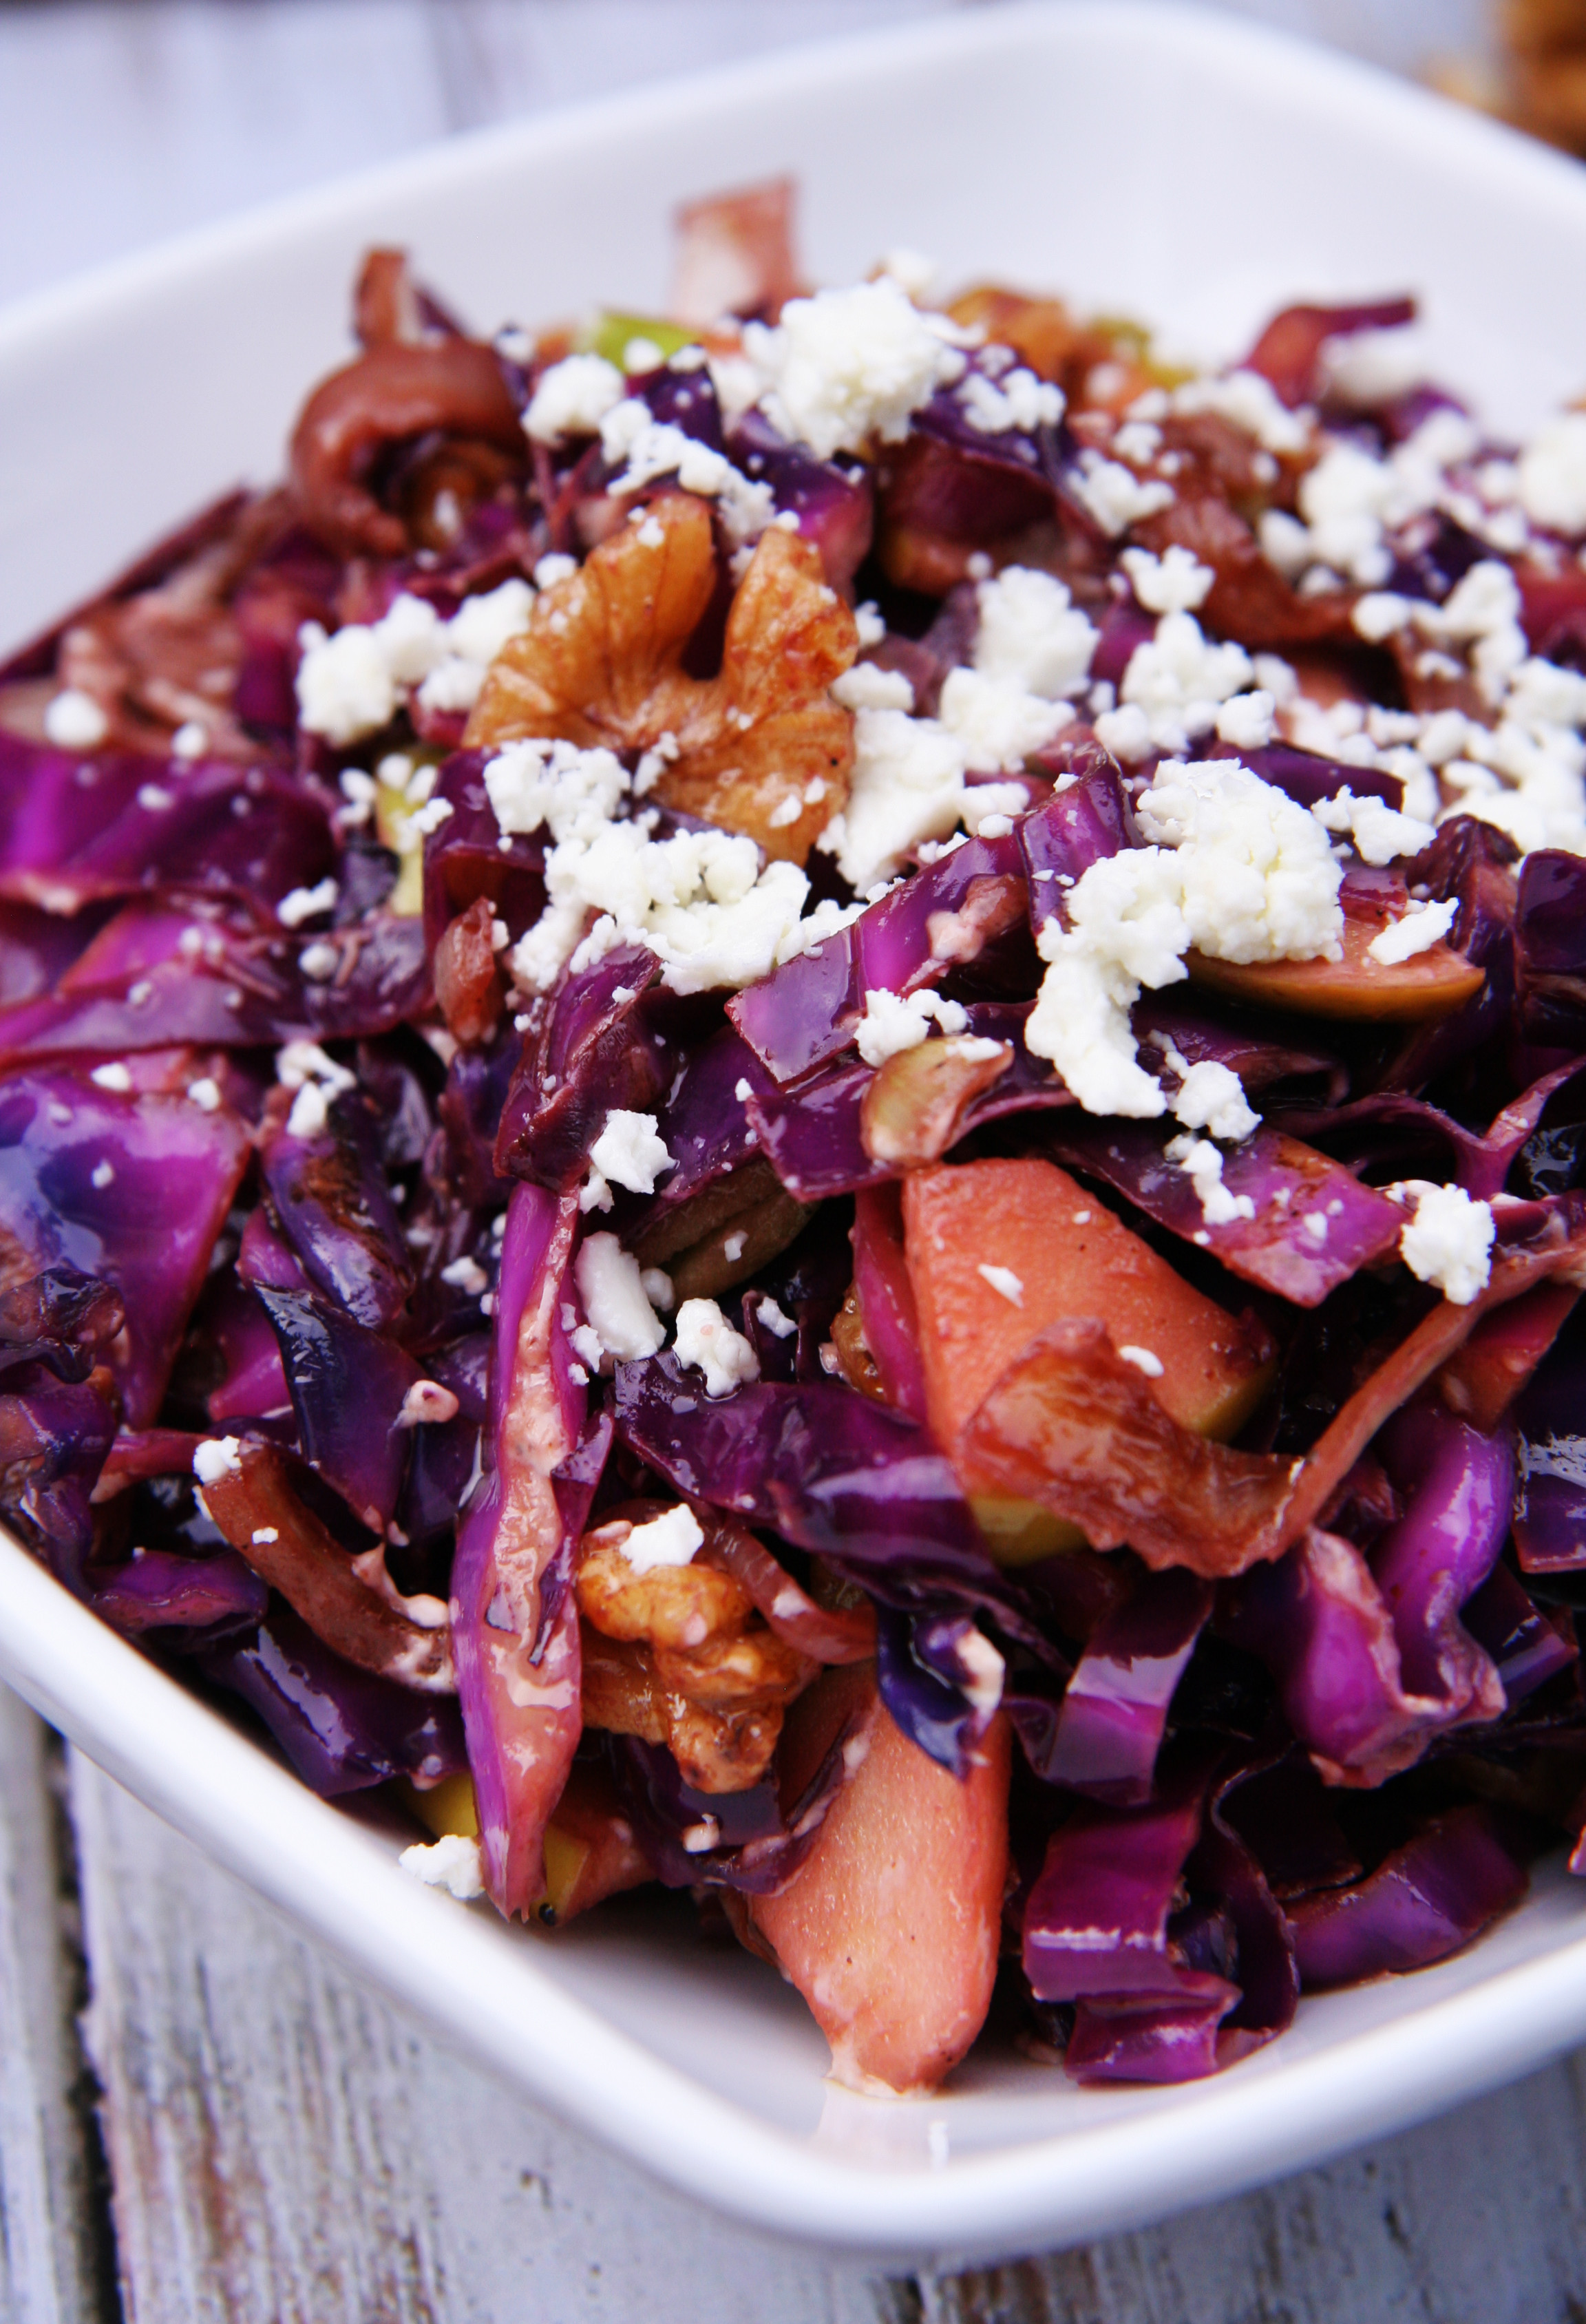 Red Cabbage Salad Recipes
 Warmed Red Cabbage Salad with Toasted Walnuts & Goat Cheese